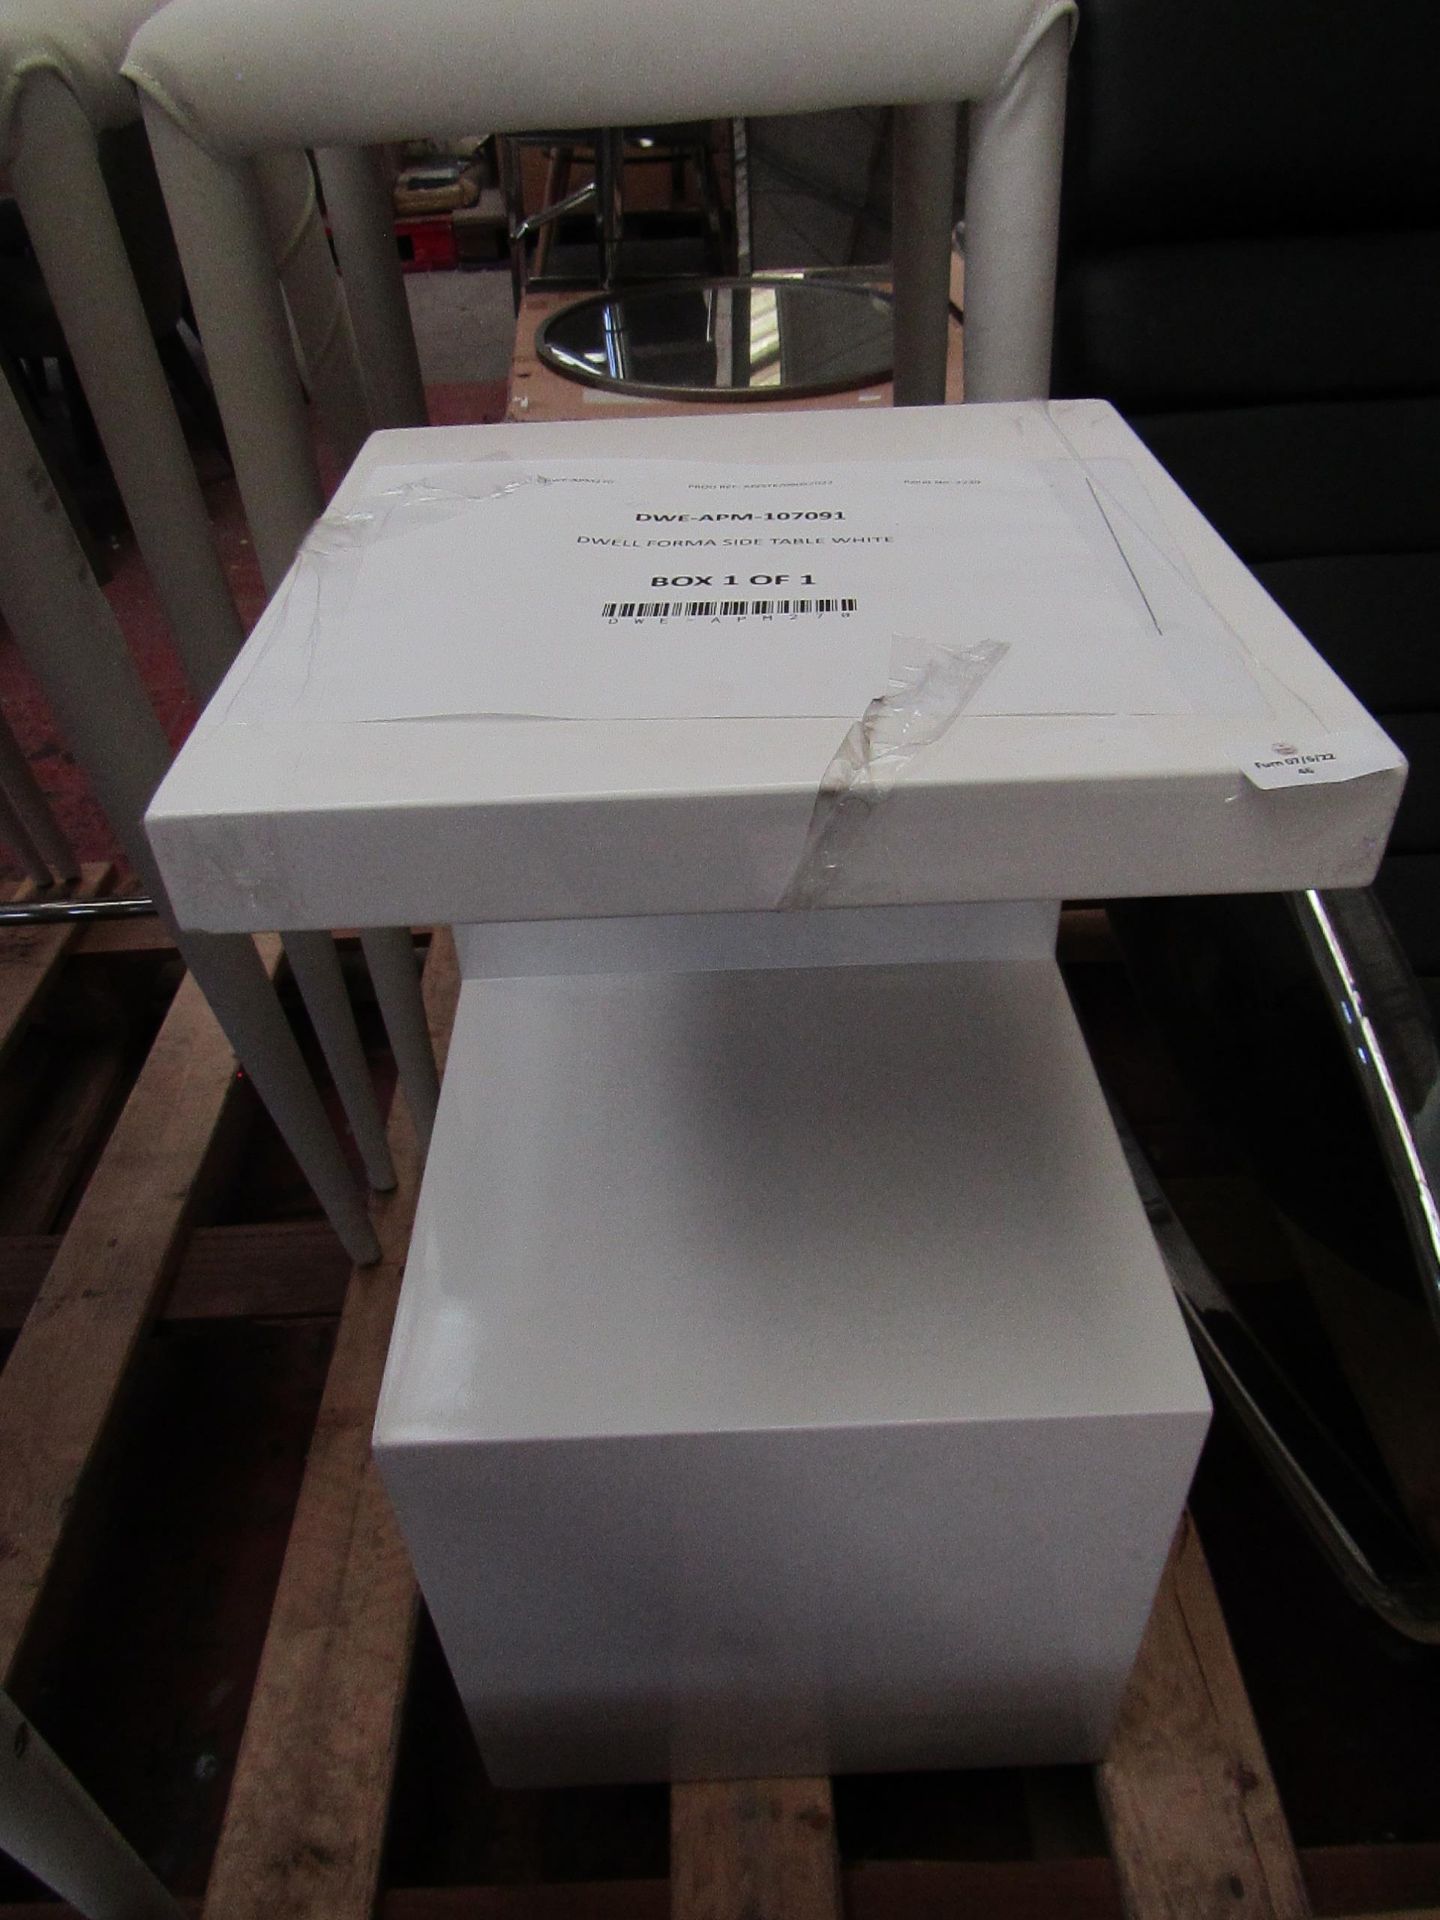 1 x Dwell Forma side table white RRP £142.00 SKU DWE-APM-107091 TOTAL RRP £142 This lot is a